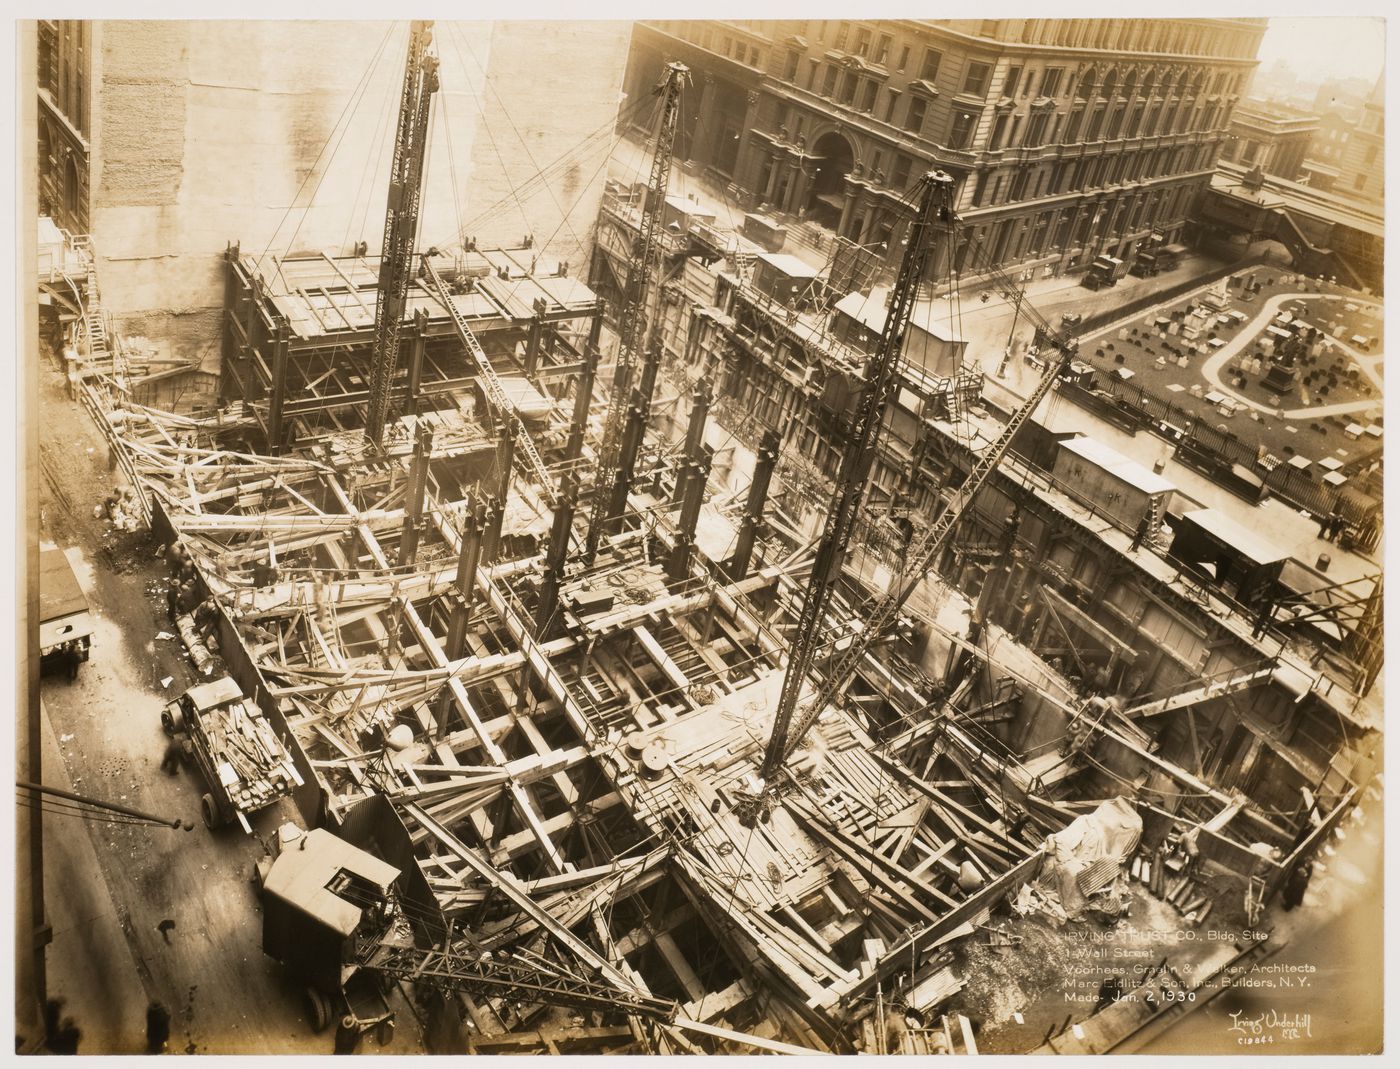 Irving Trust Company Building Site, 1 Wall Street, New York City